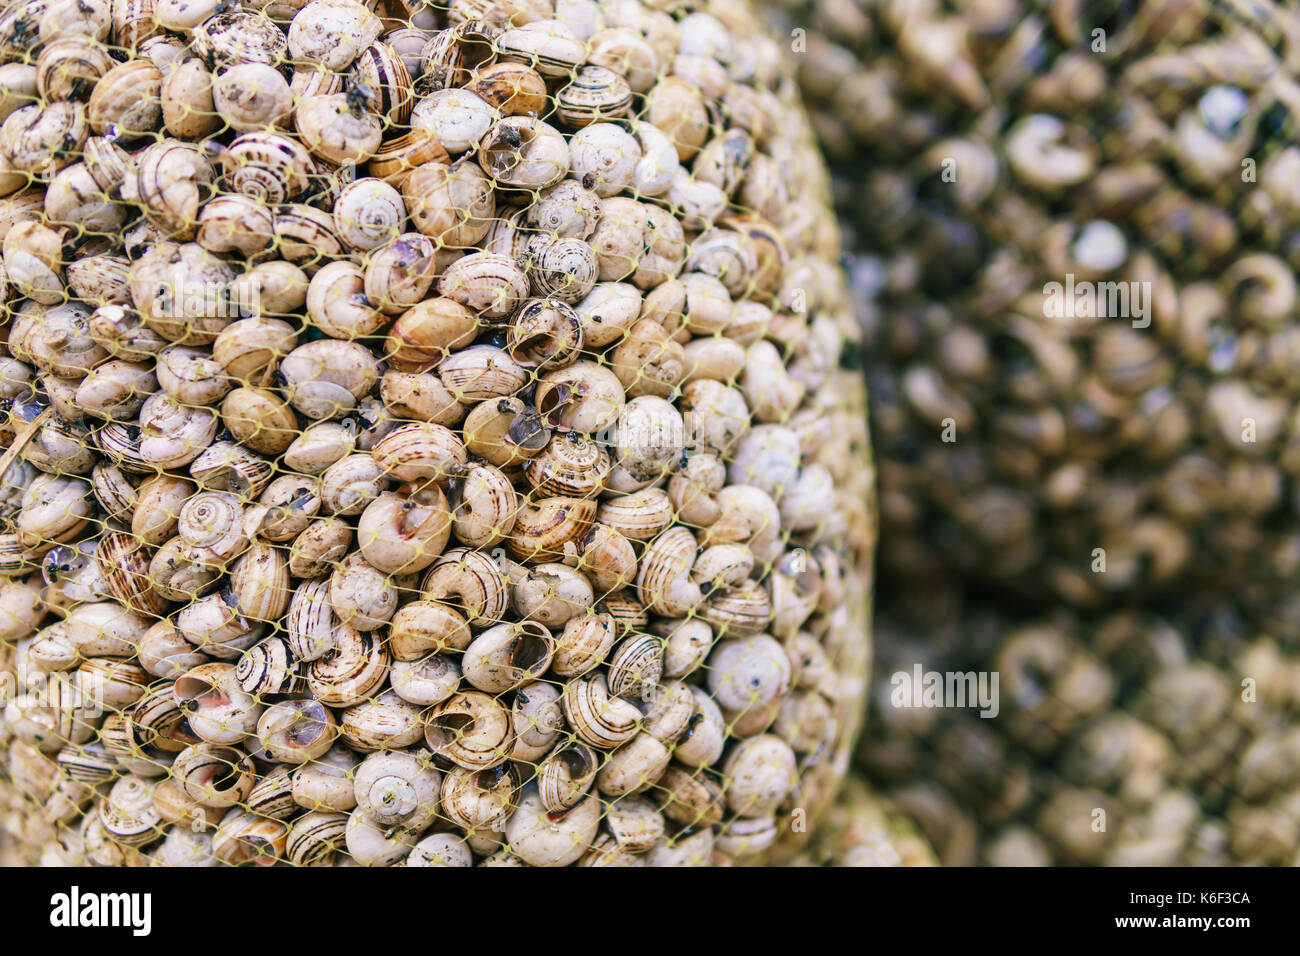 Fresh Caracois Snails Specialty For Sale In Portugal Fish Market Stock Photo